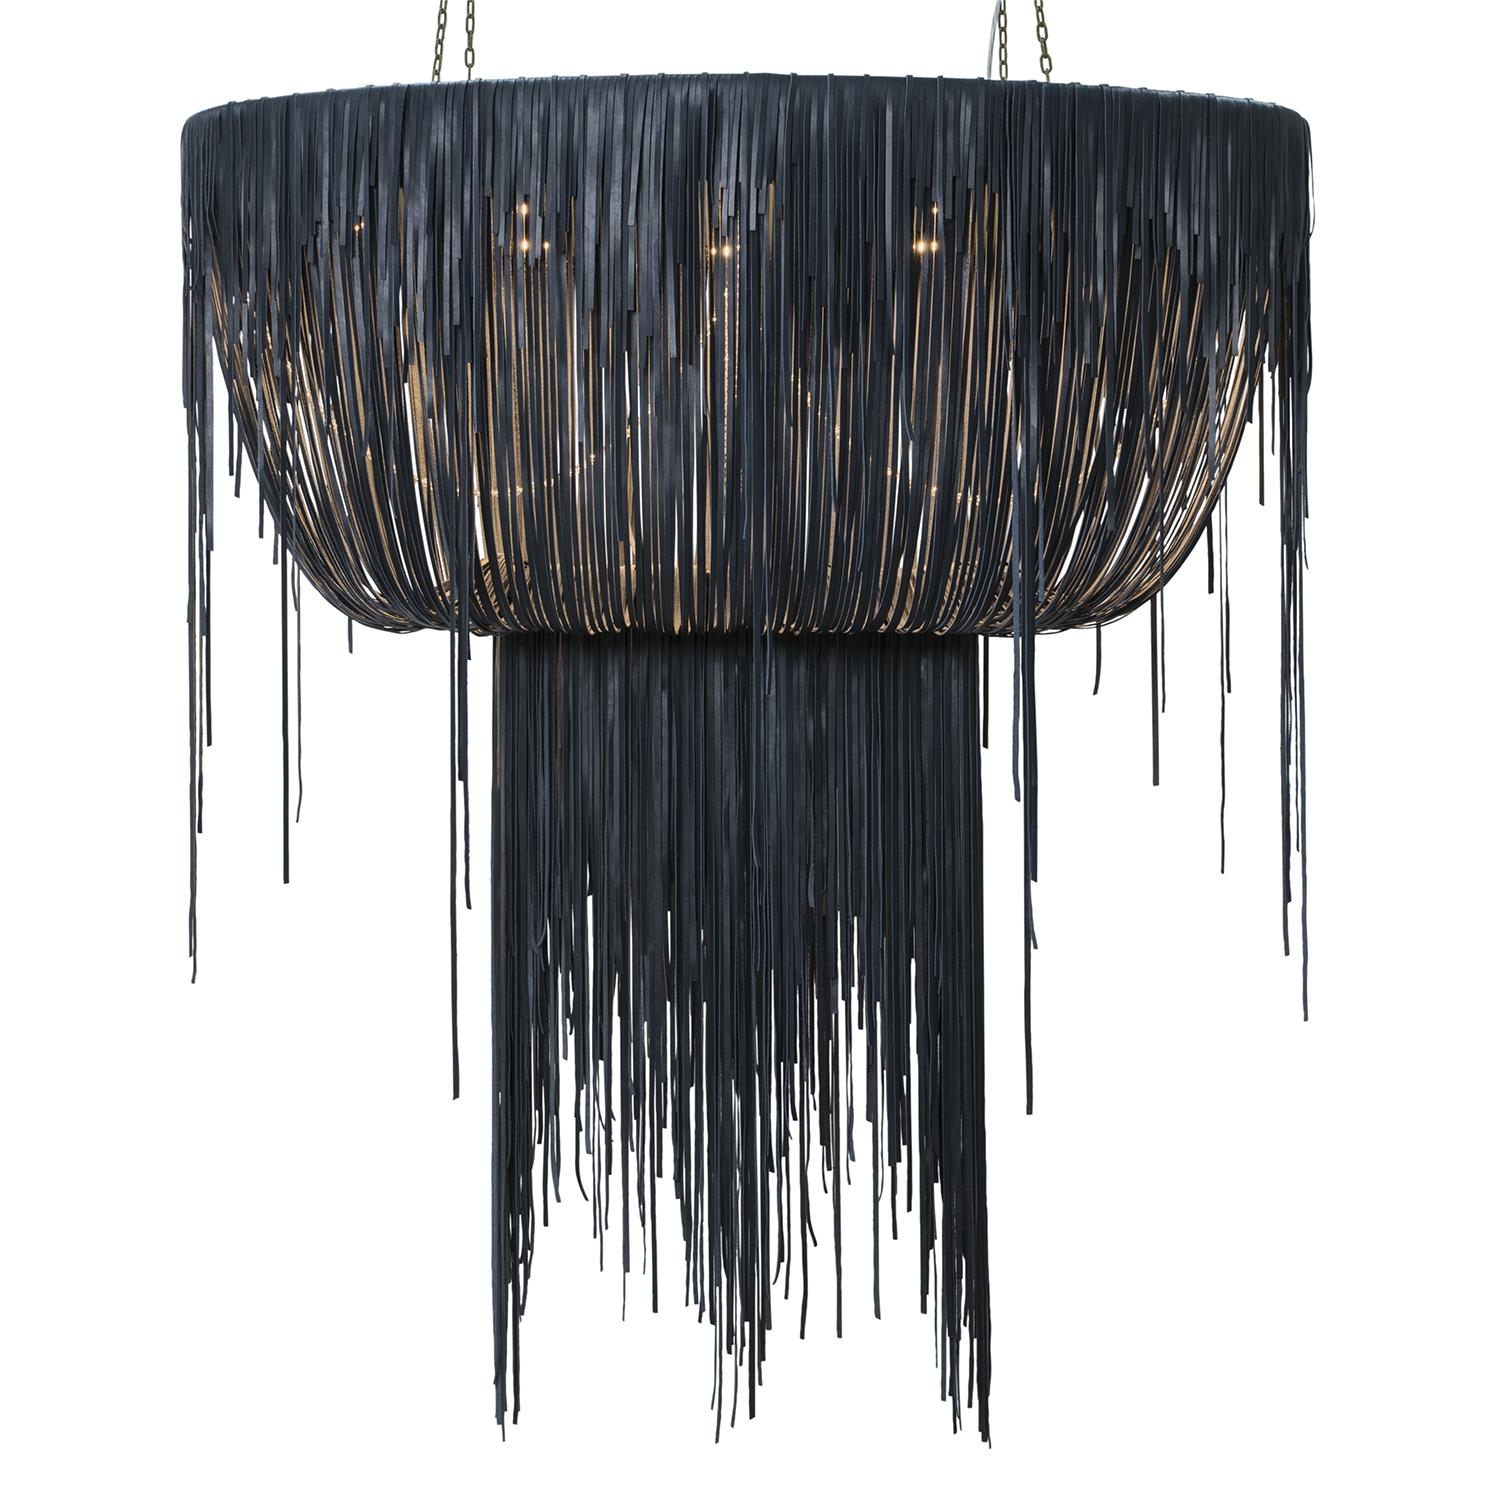 Large Oval Urchin Leather Chandelier in NeKeia Leather